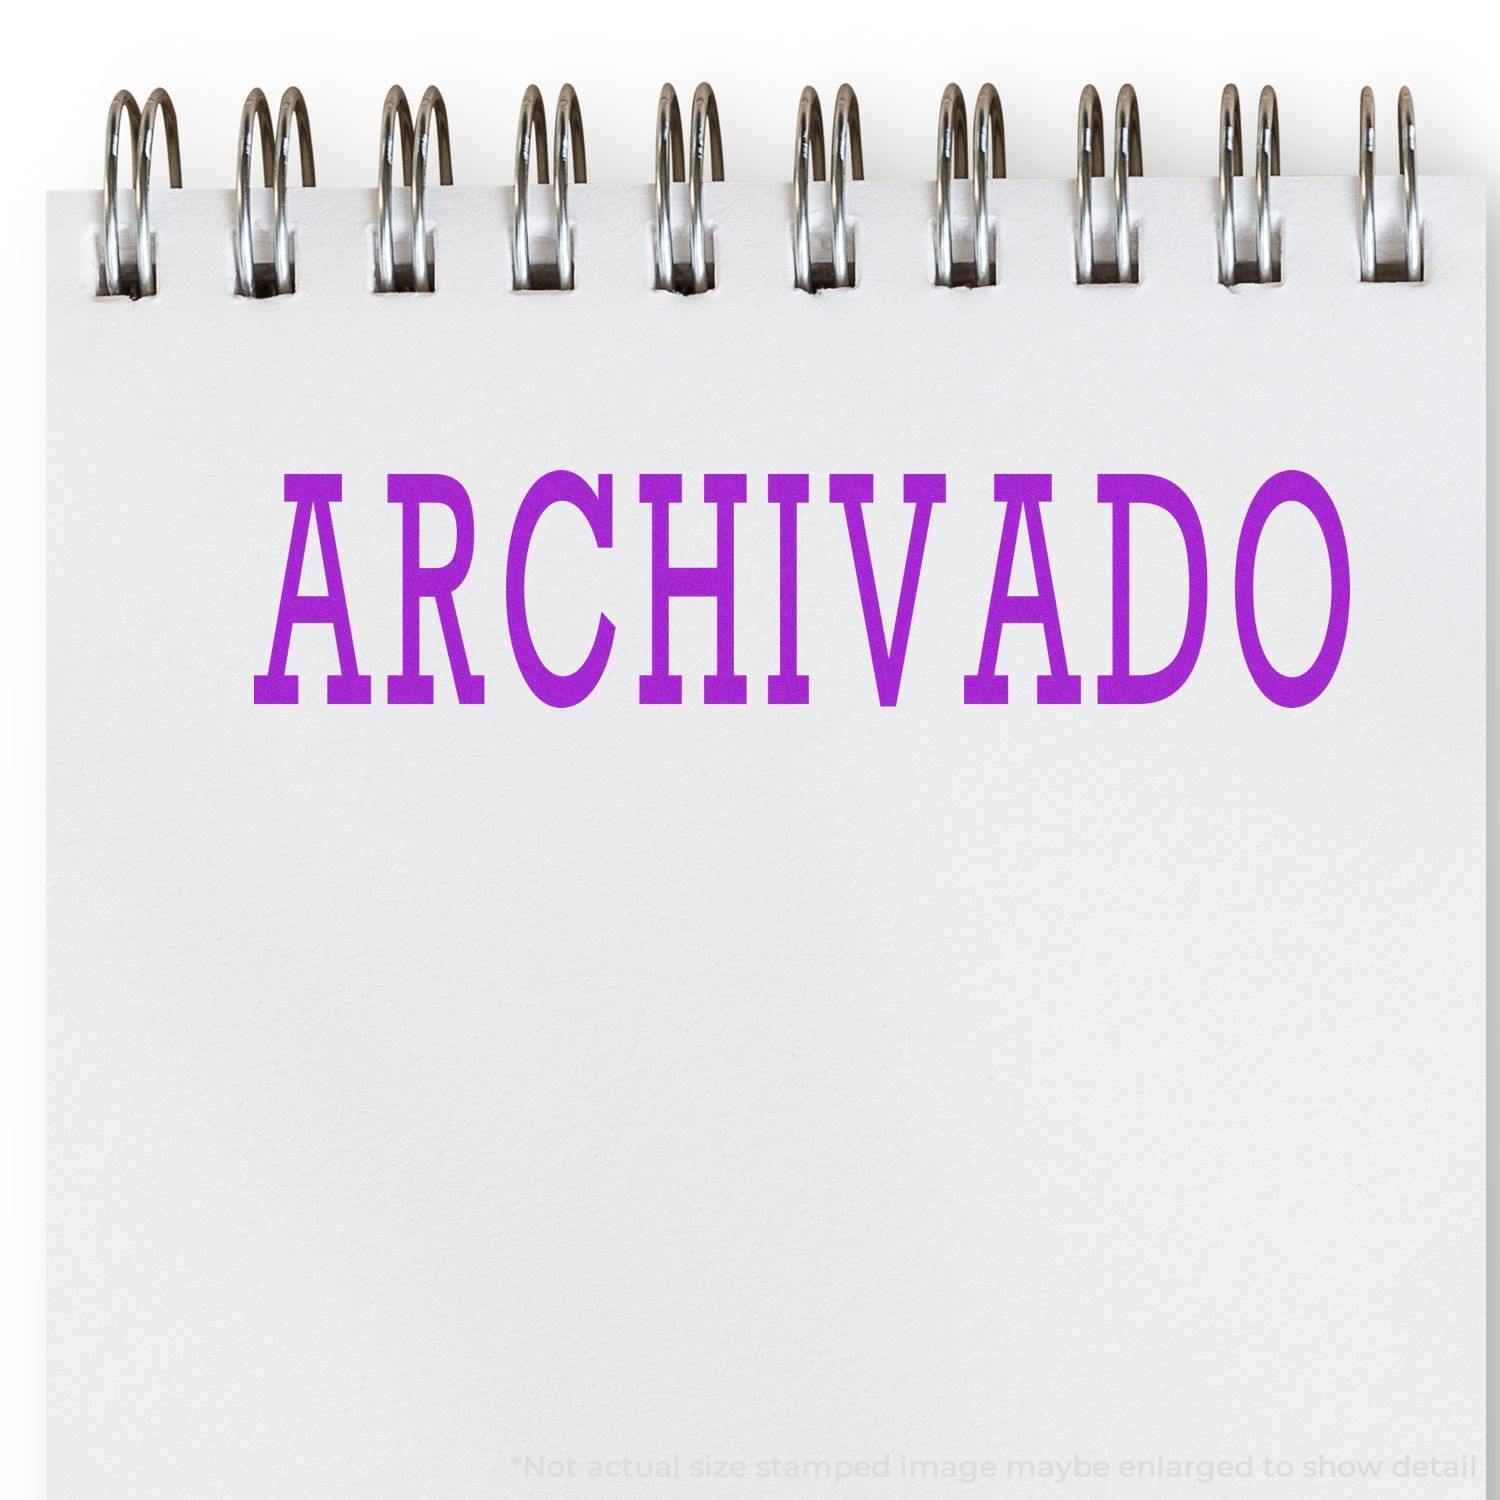 A self-inking stamp with a stamped image showing how the text "ARCHIVADO" in a large font is displayed by it after stamping.